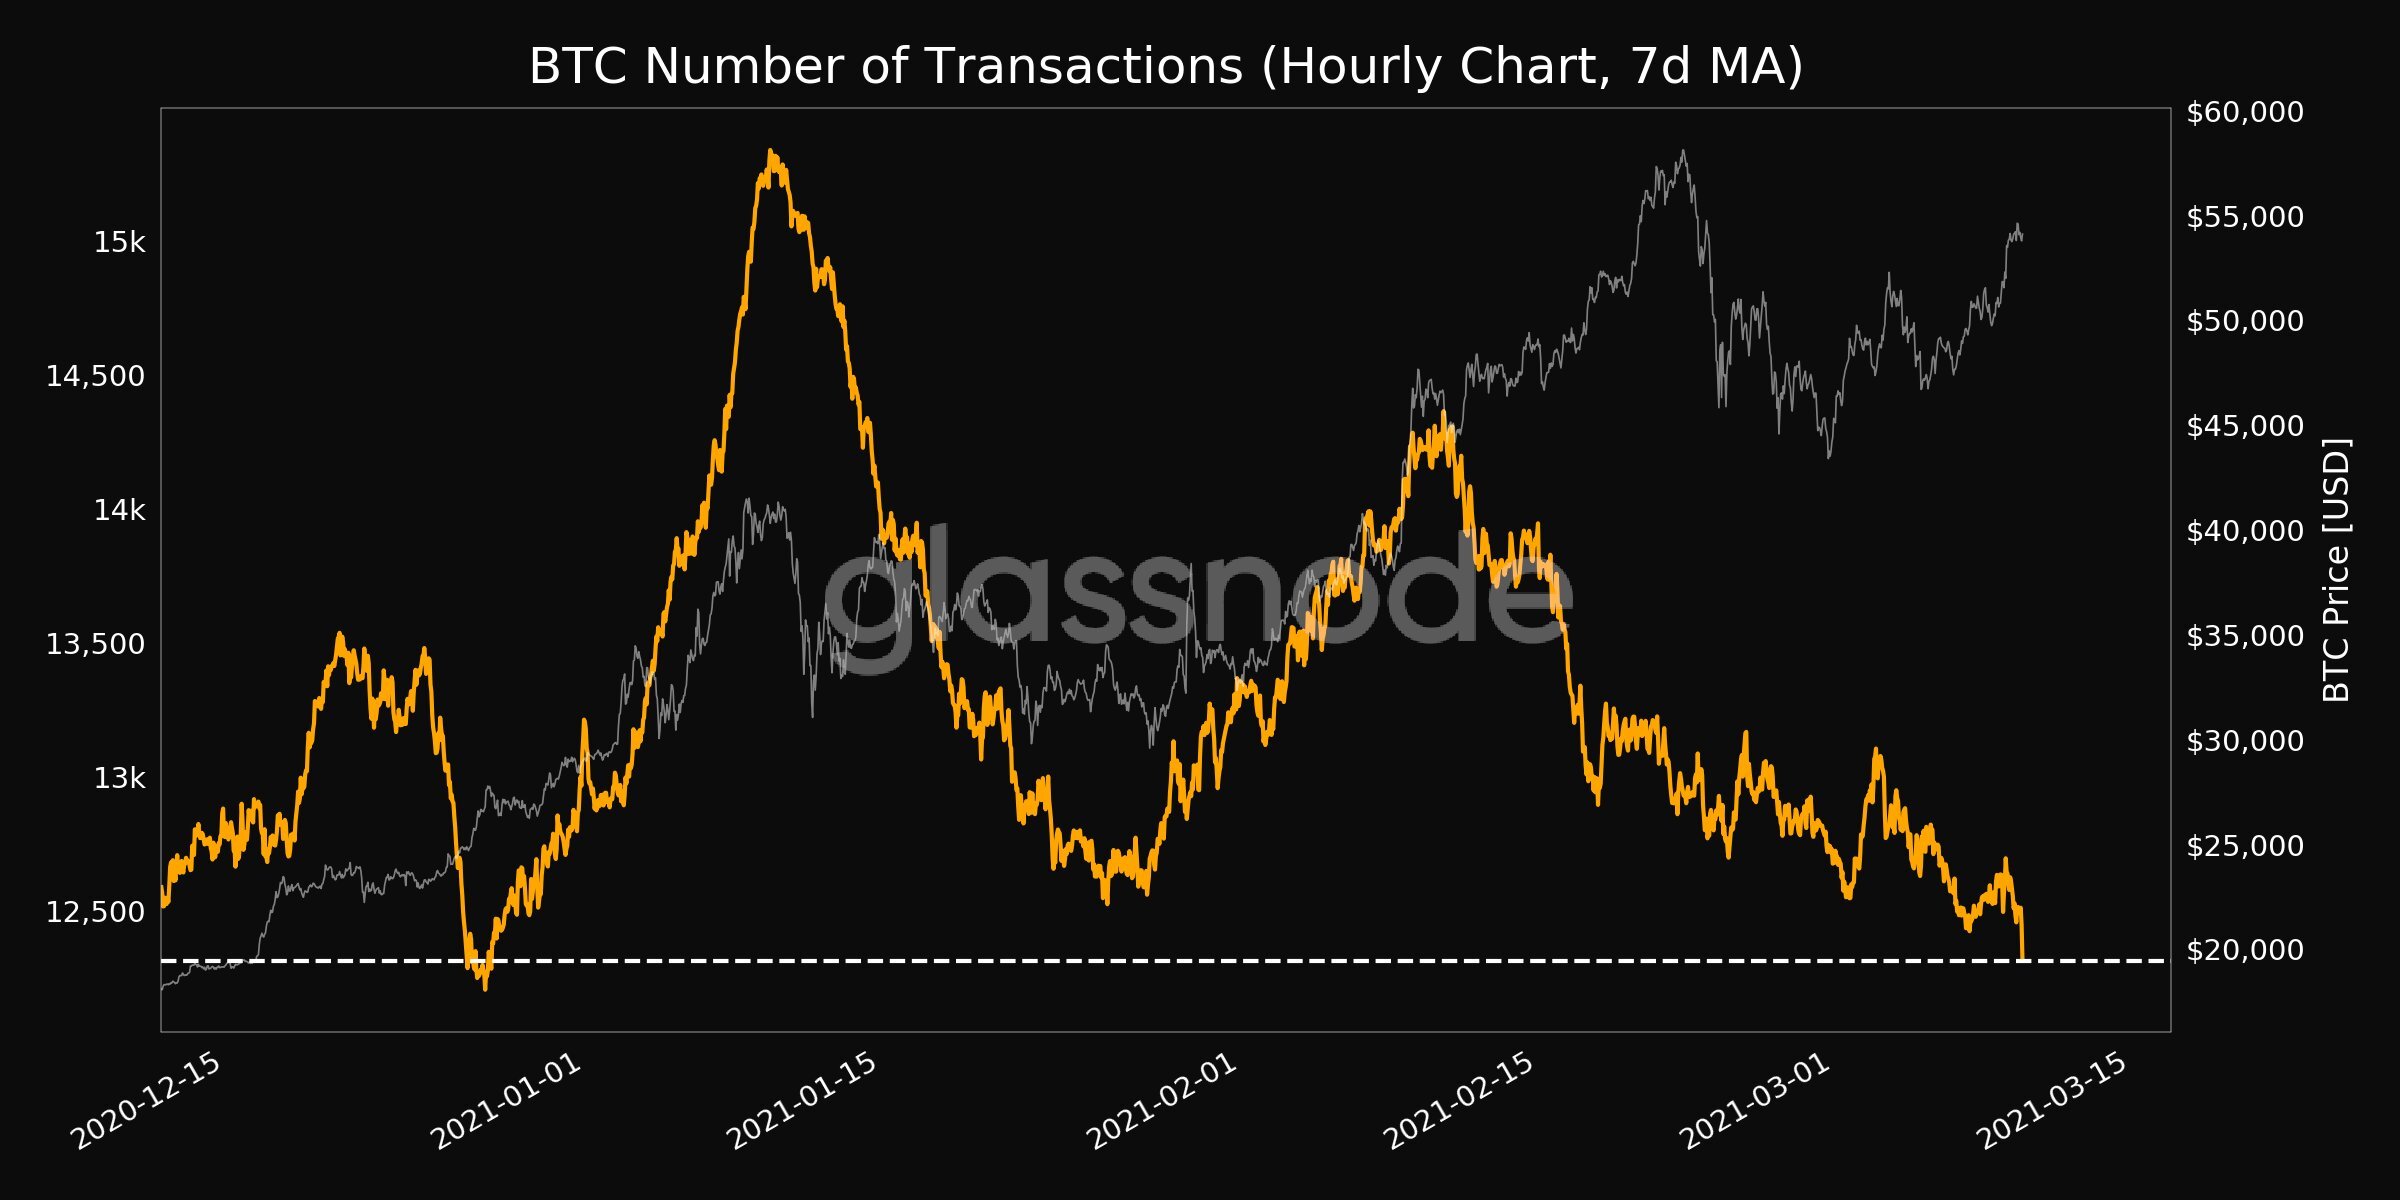 Bitcoin Number of Transactions. Source: Glassnode